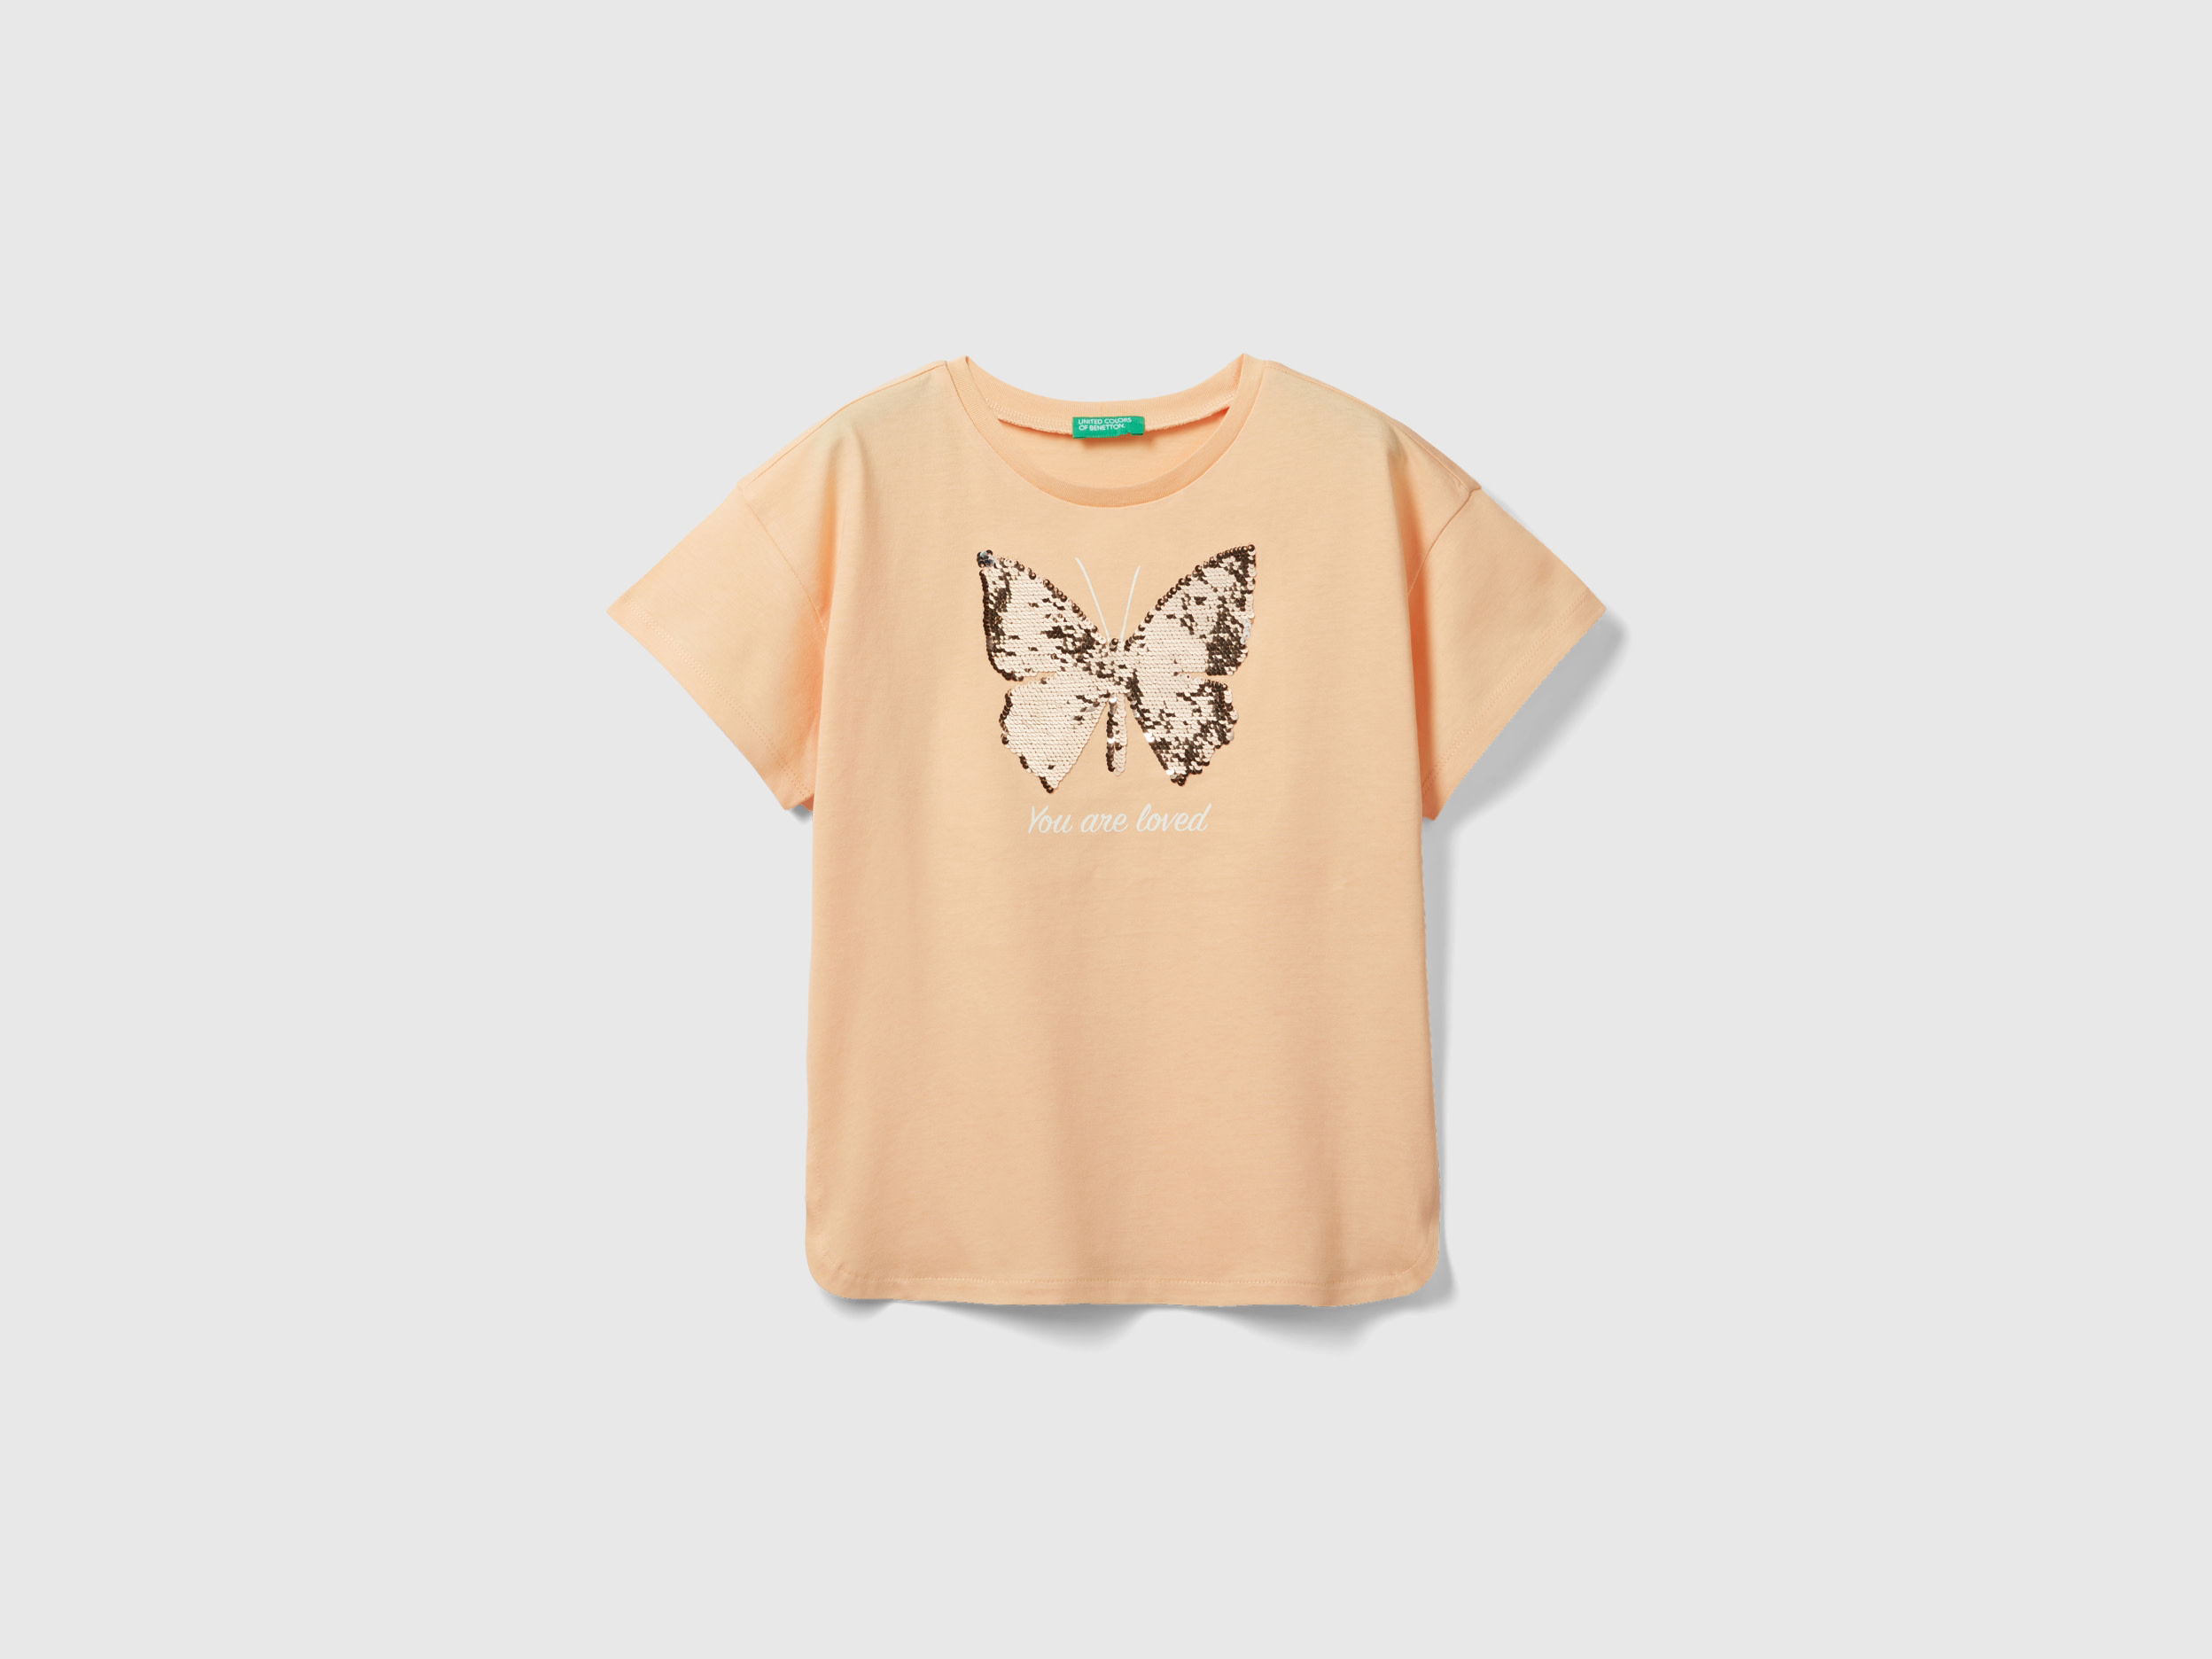 Image of Benetton, T-shirt With Reversible Sequins, size 3XL, Peach, Kids